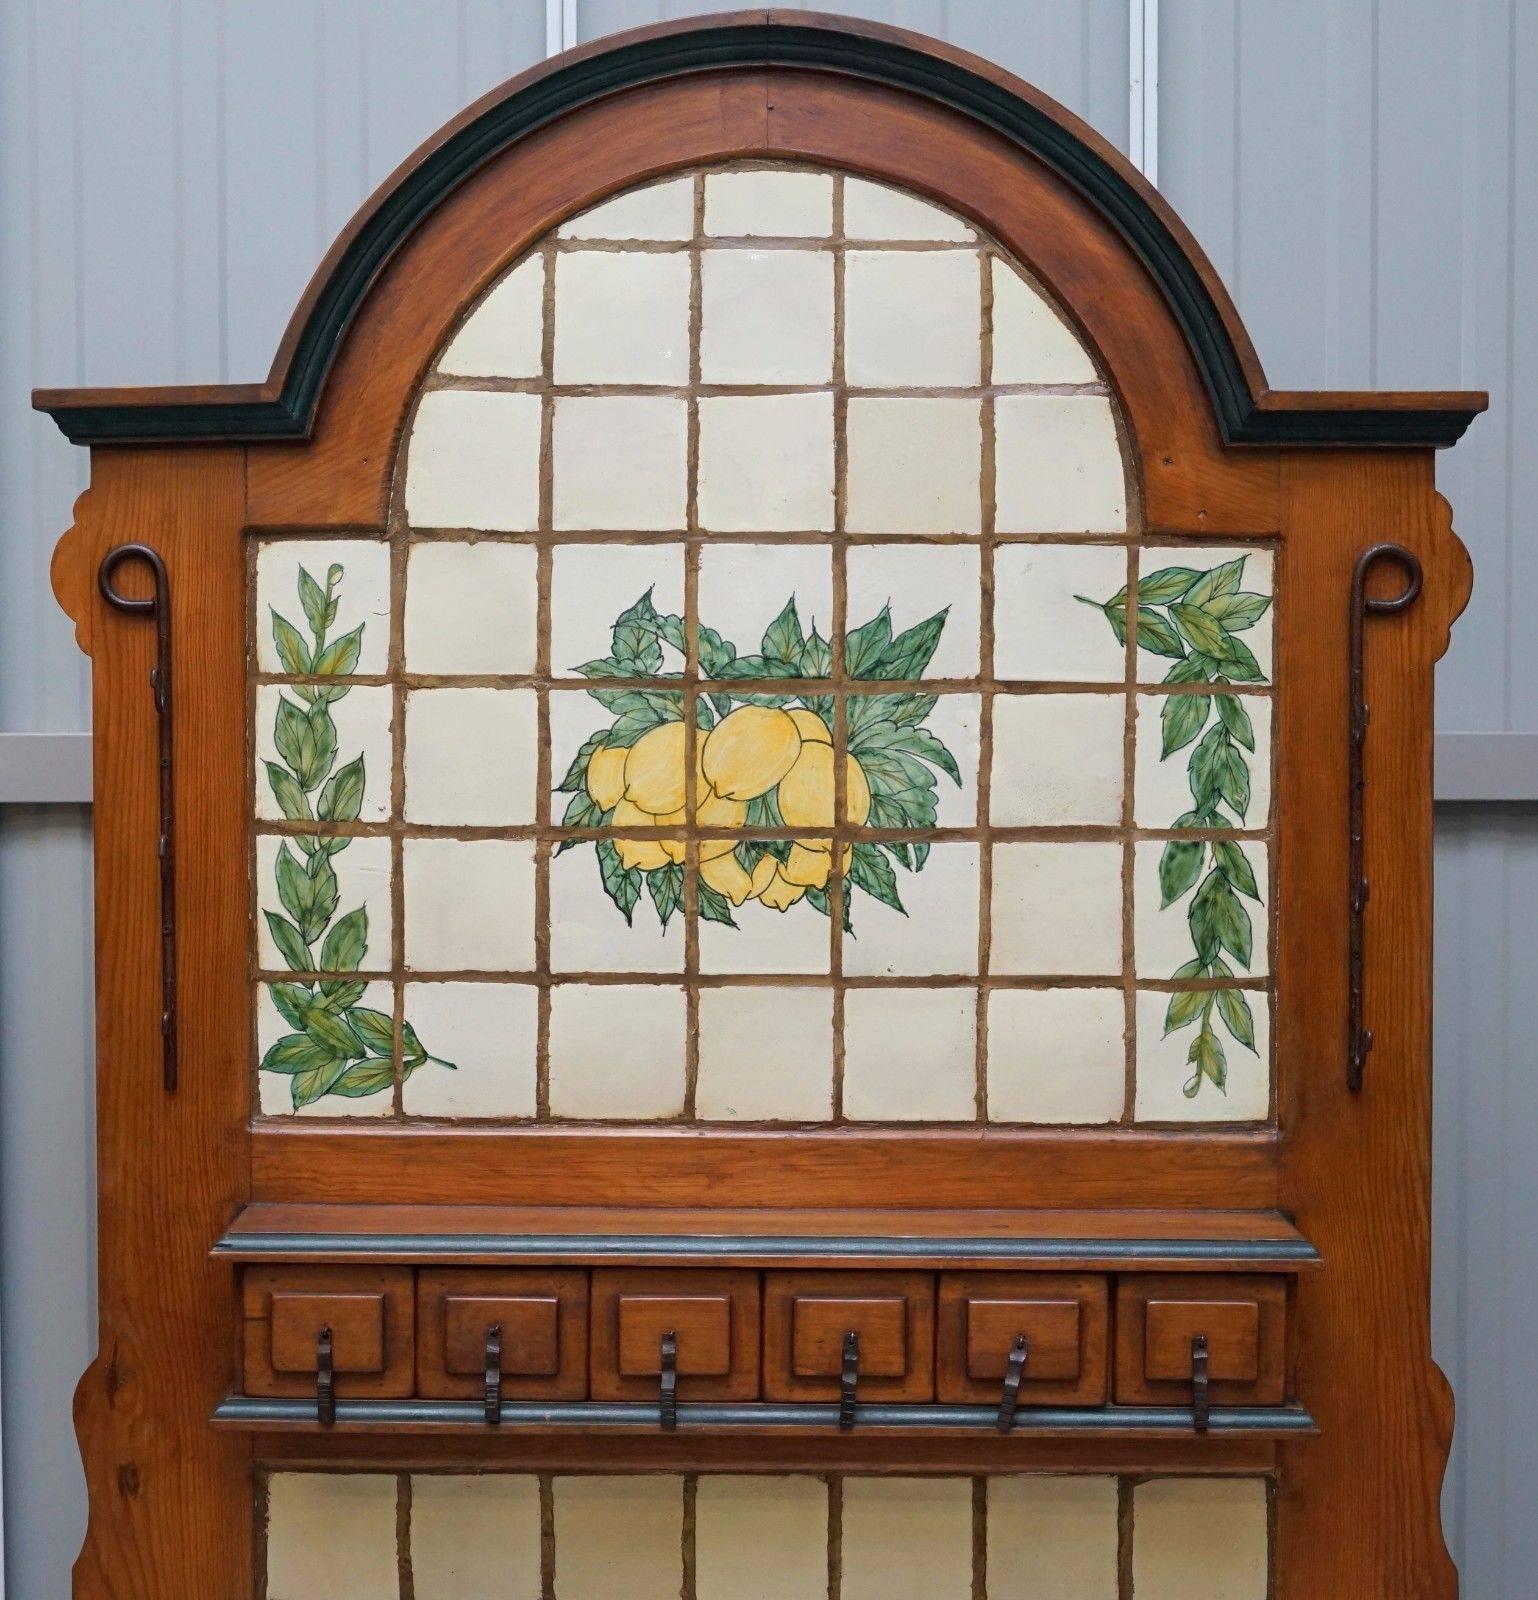 Hand-Carved Stunning Vintage Solid Oak Tiled Farmhouse Country Sideboard Rustic Charm